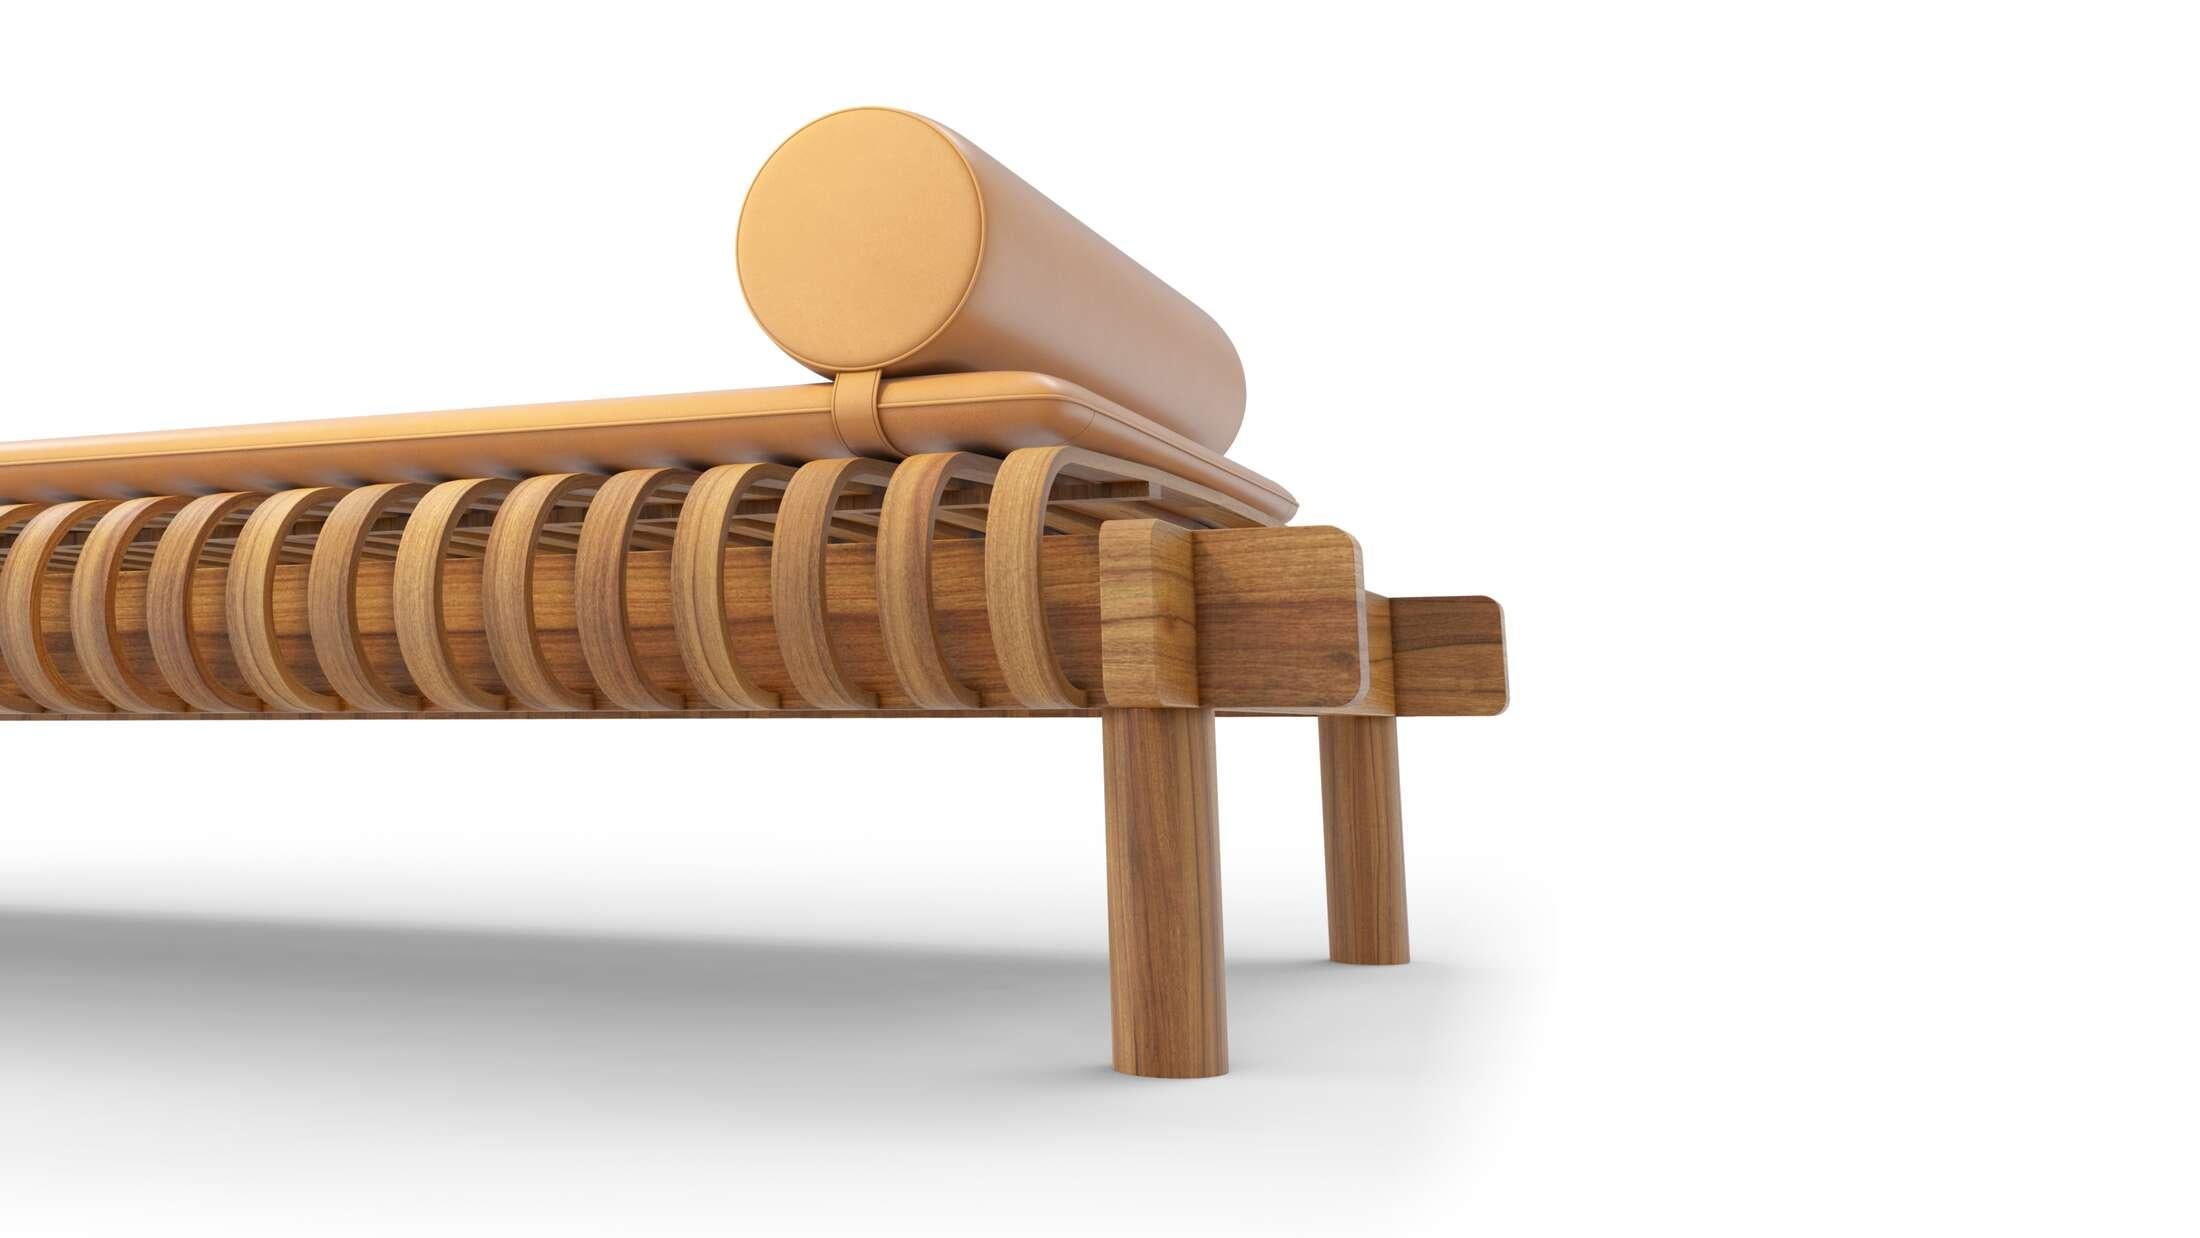 Teak Limited Edition Charlotte Perriand Tokyo Dormeuse for Cassina, Italy - 2022